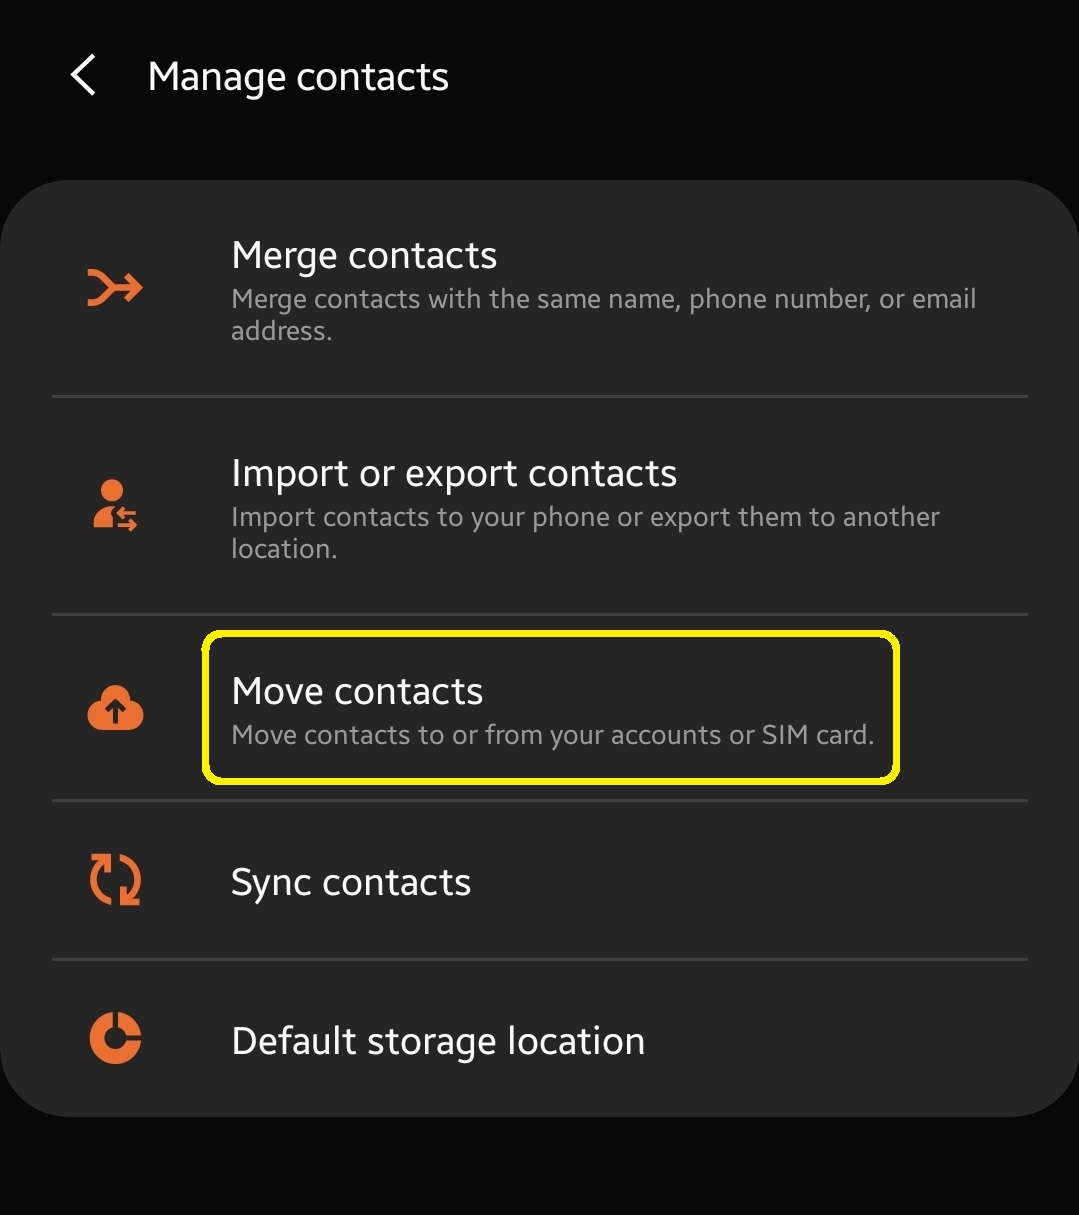 Move contacts